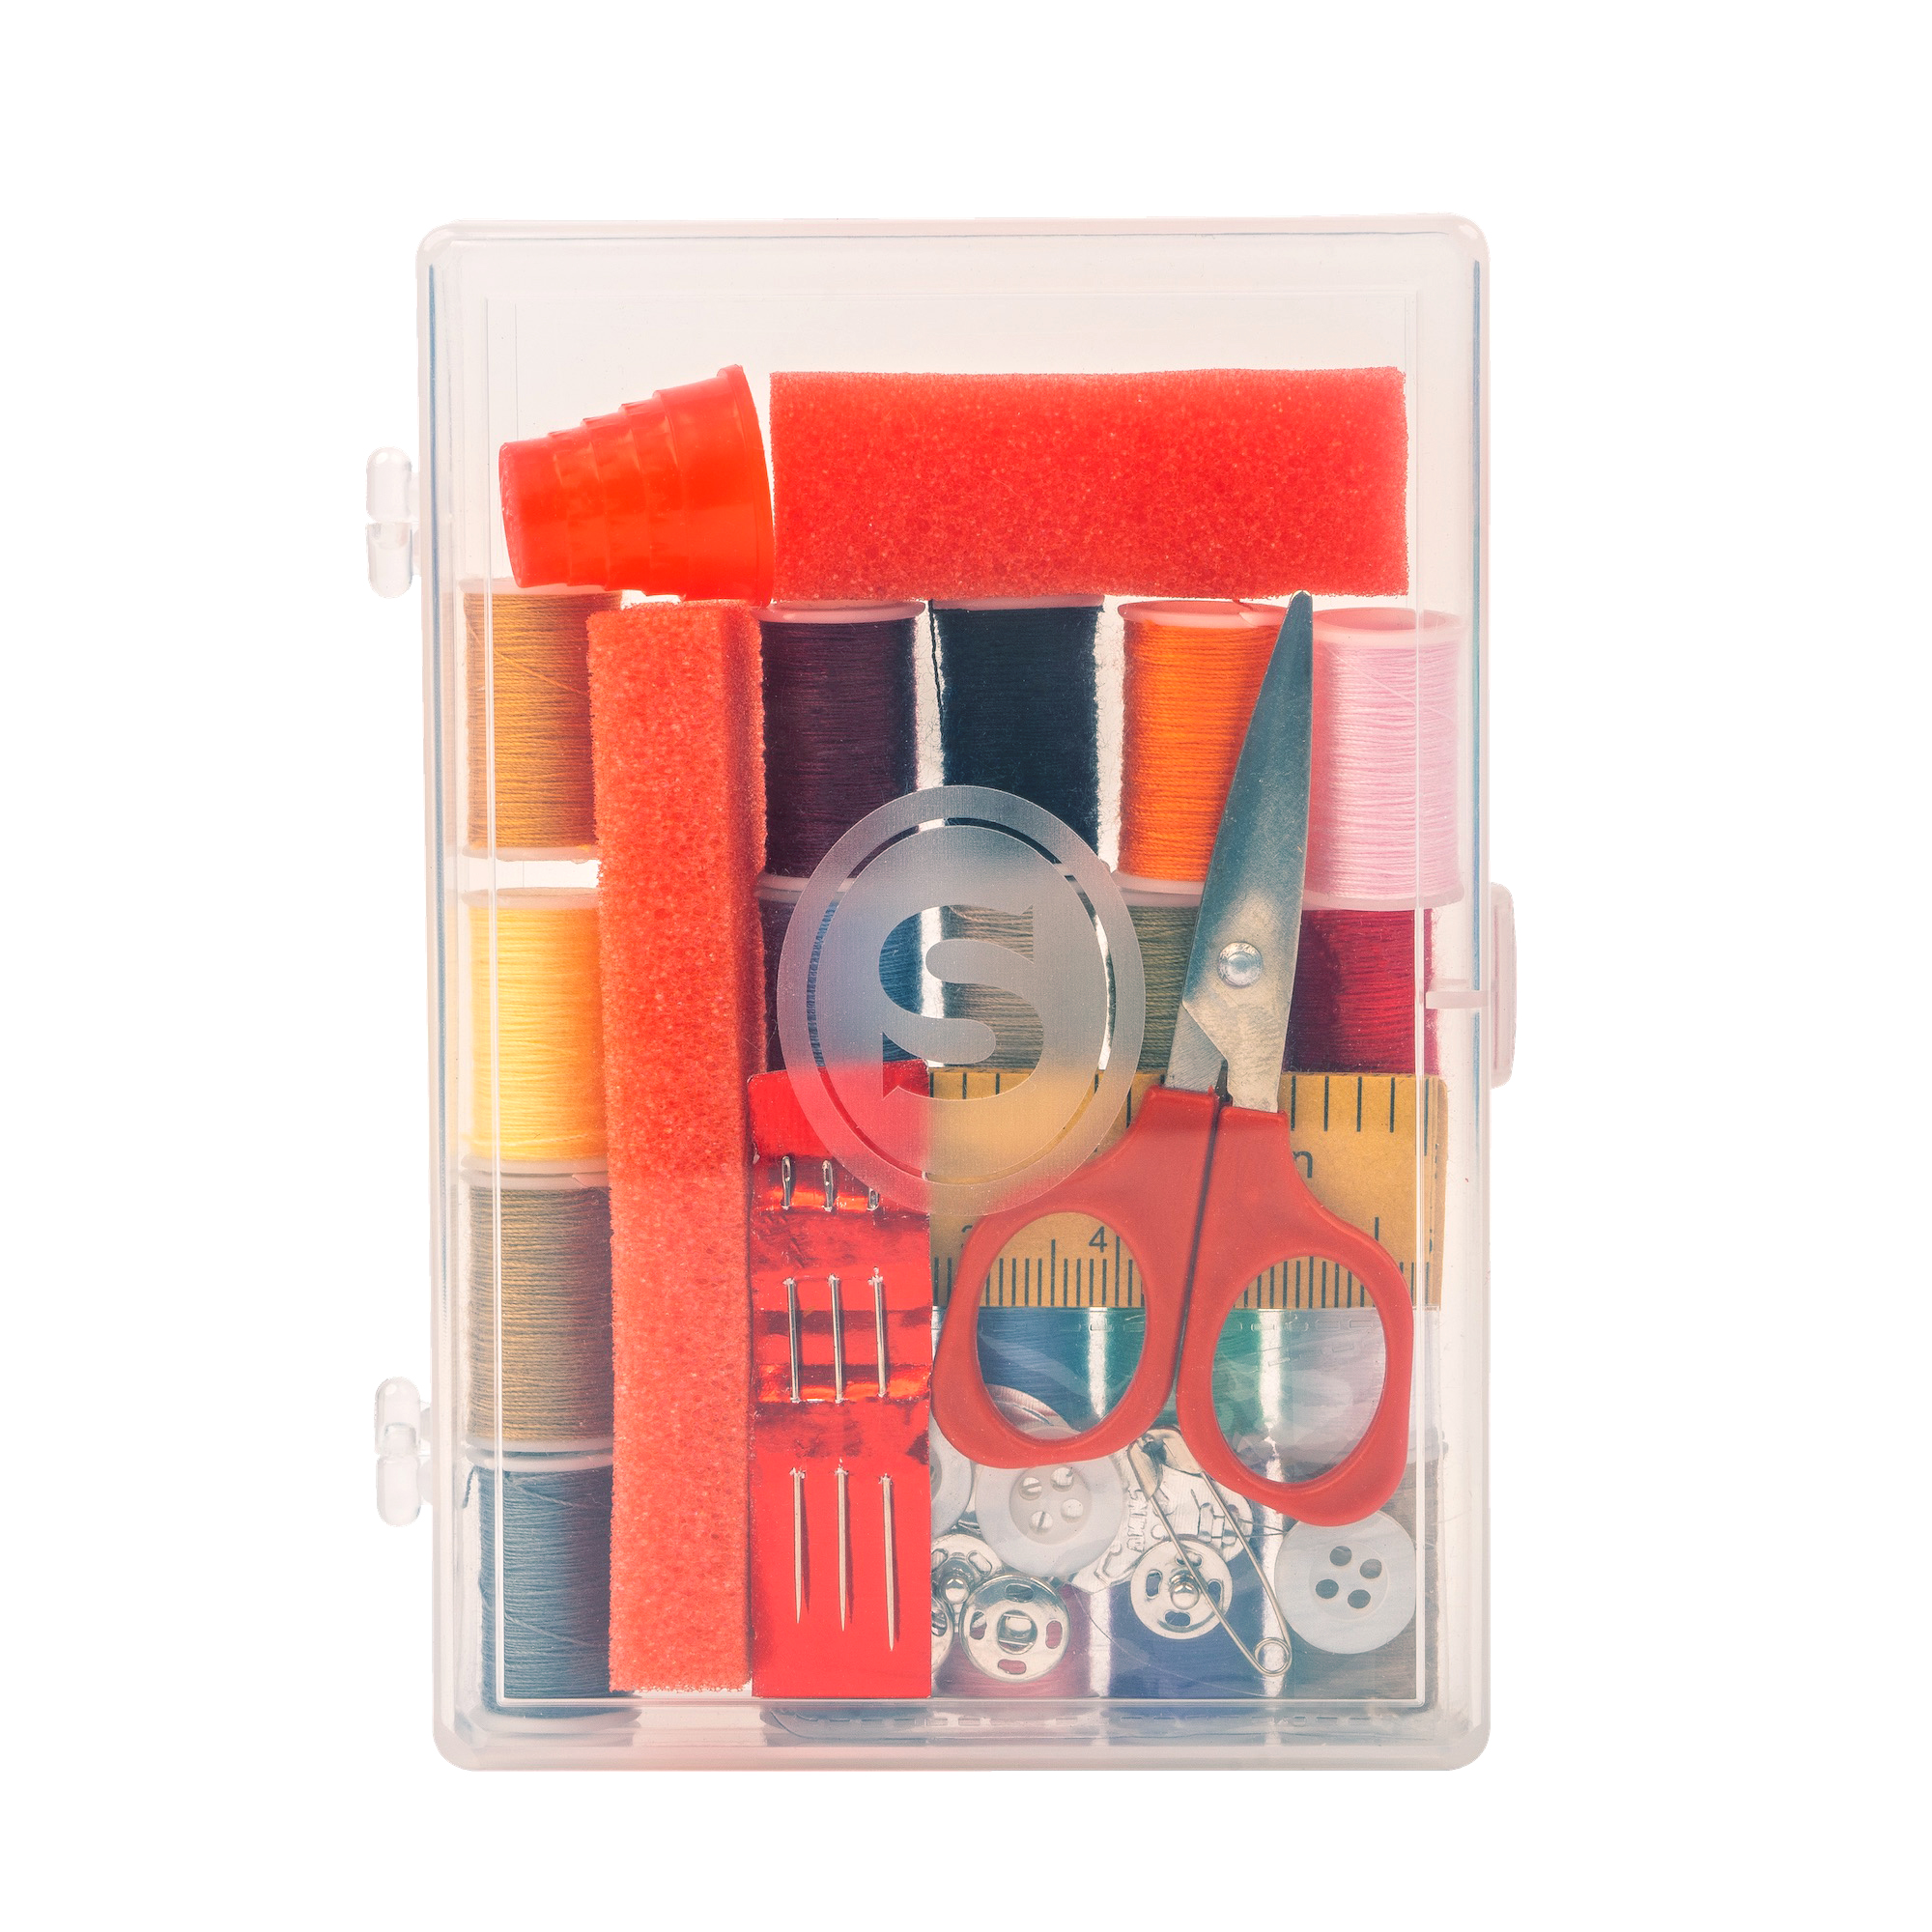 Deluxe Sewing Kit- - image 2 of 6